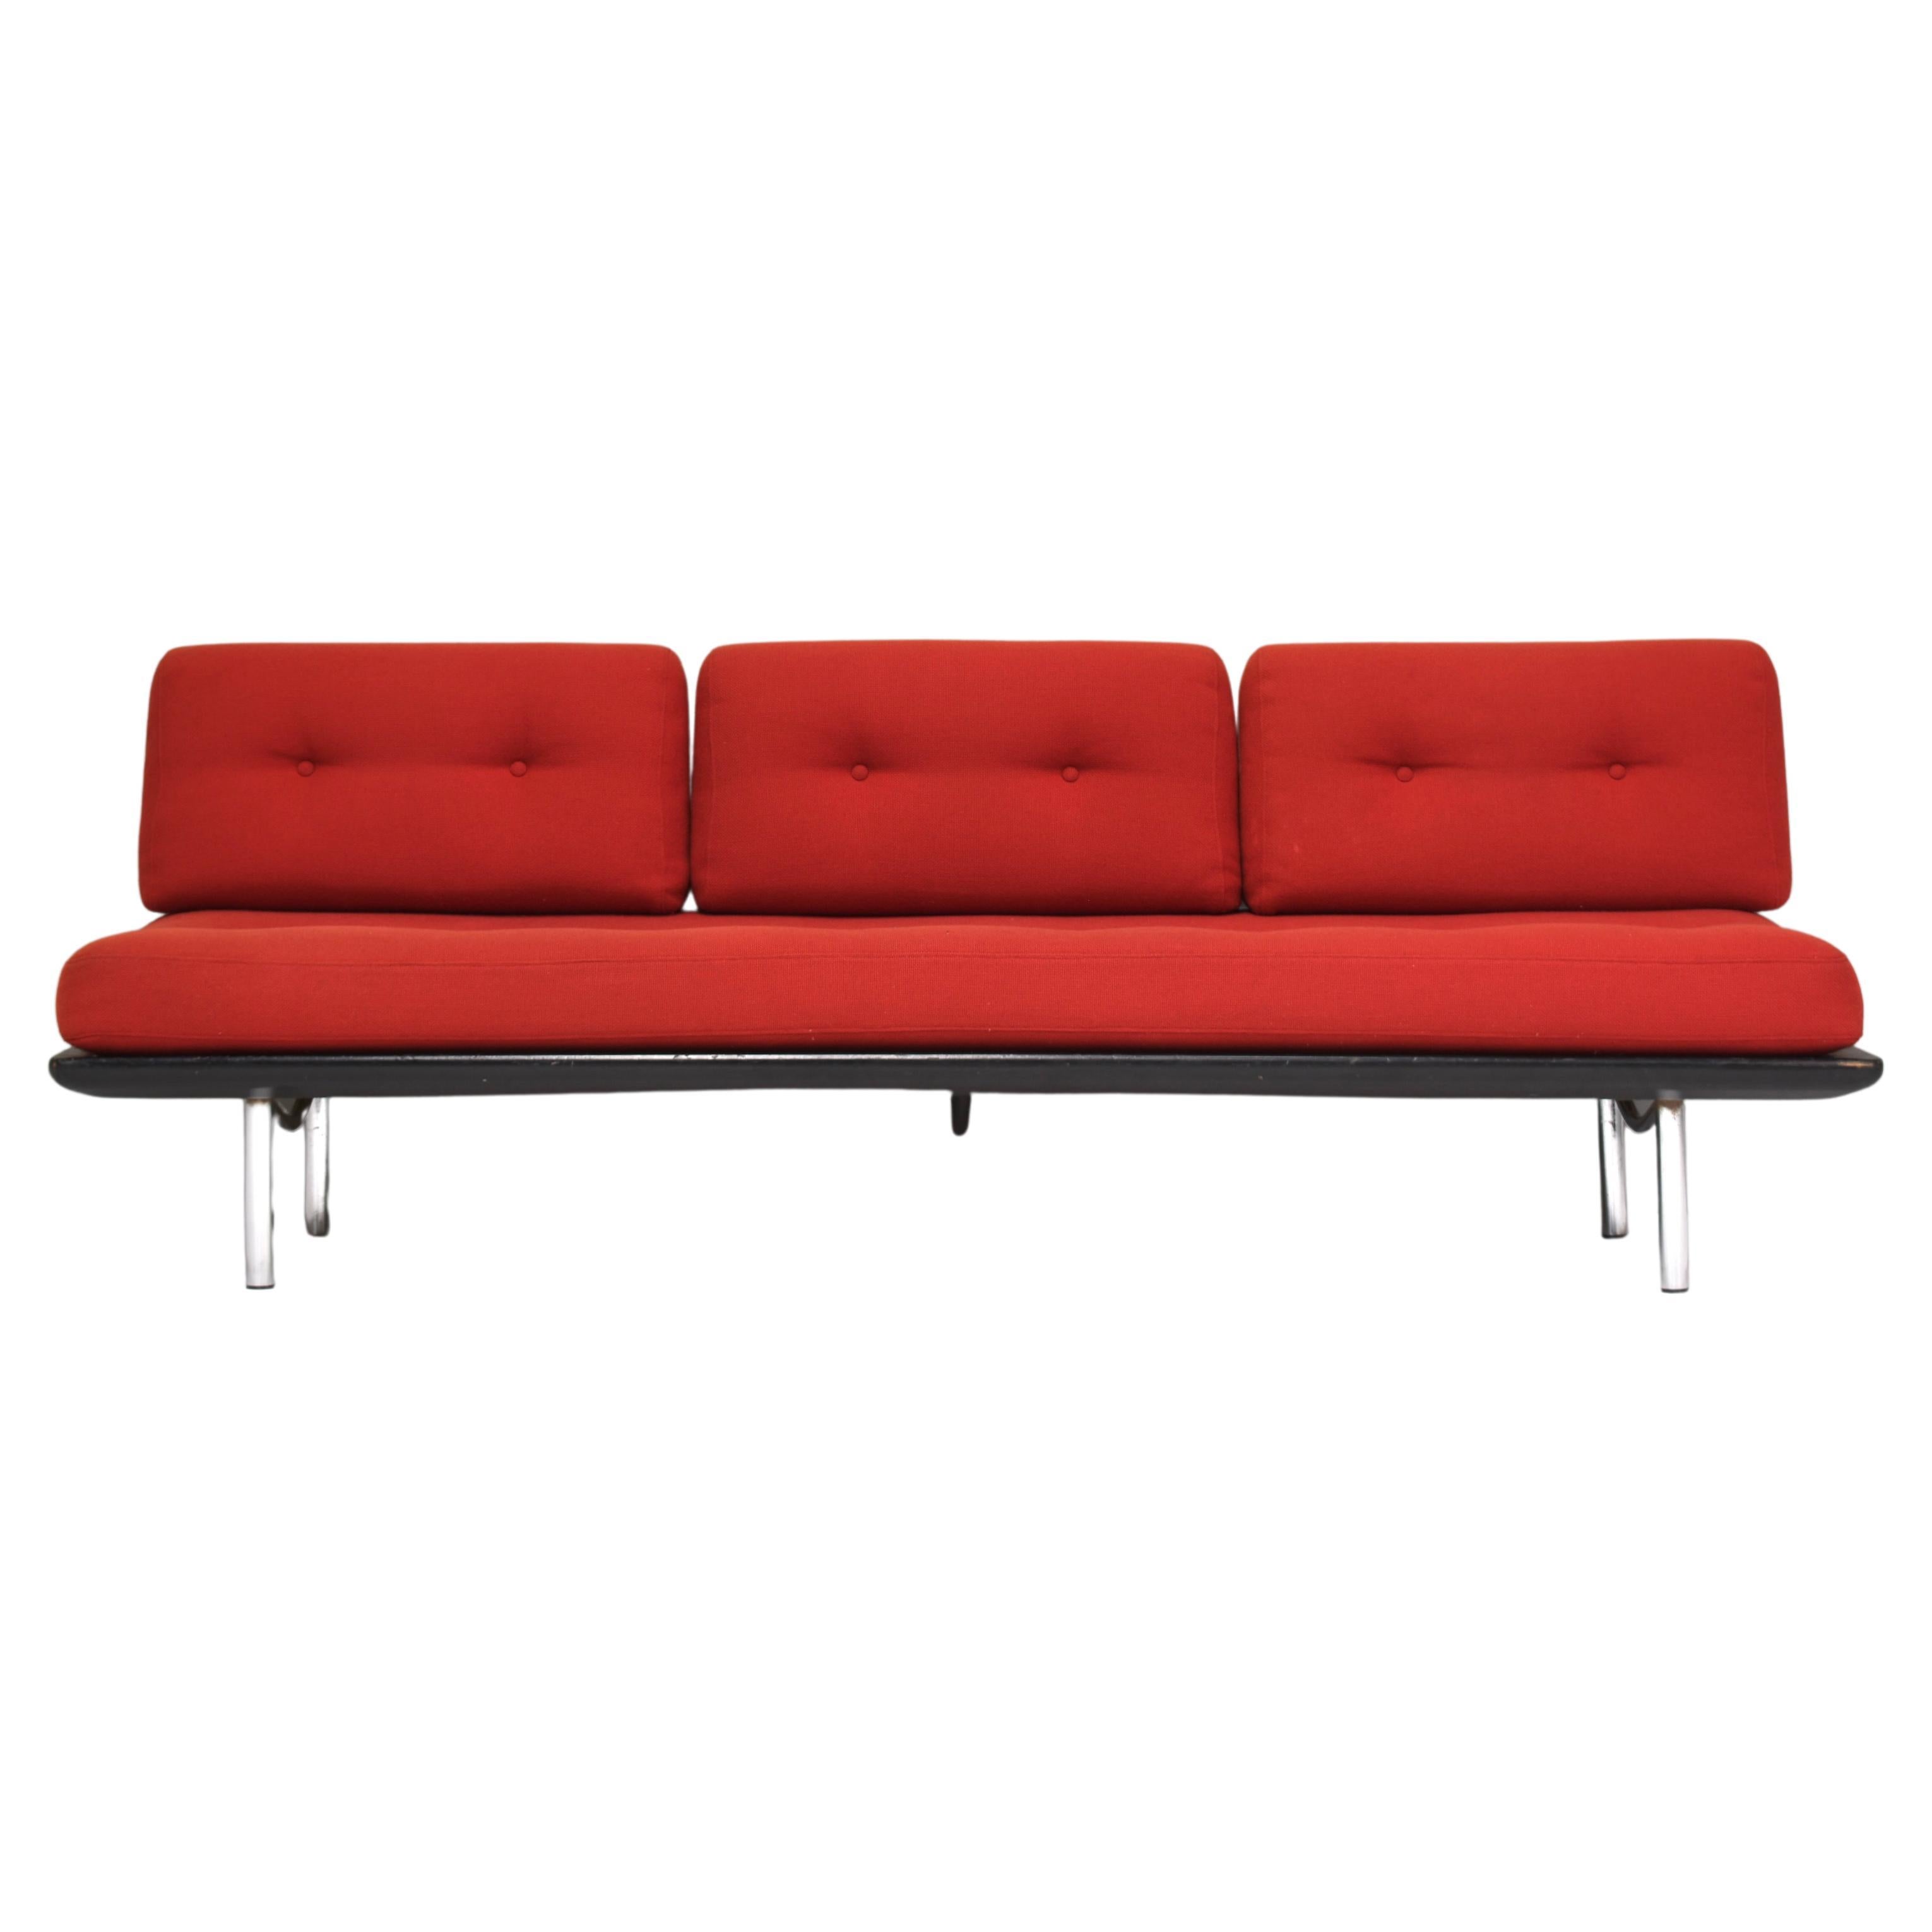 Sofa by or in the Style of Martin Visser or Kho Liang Ie, Netherlands, 1960s For Sale